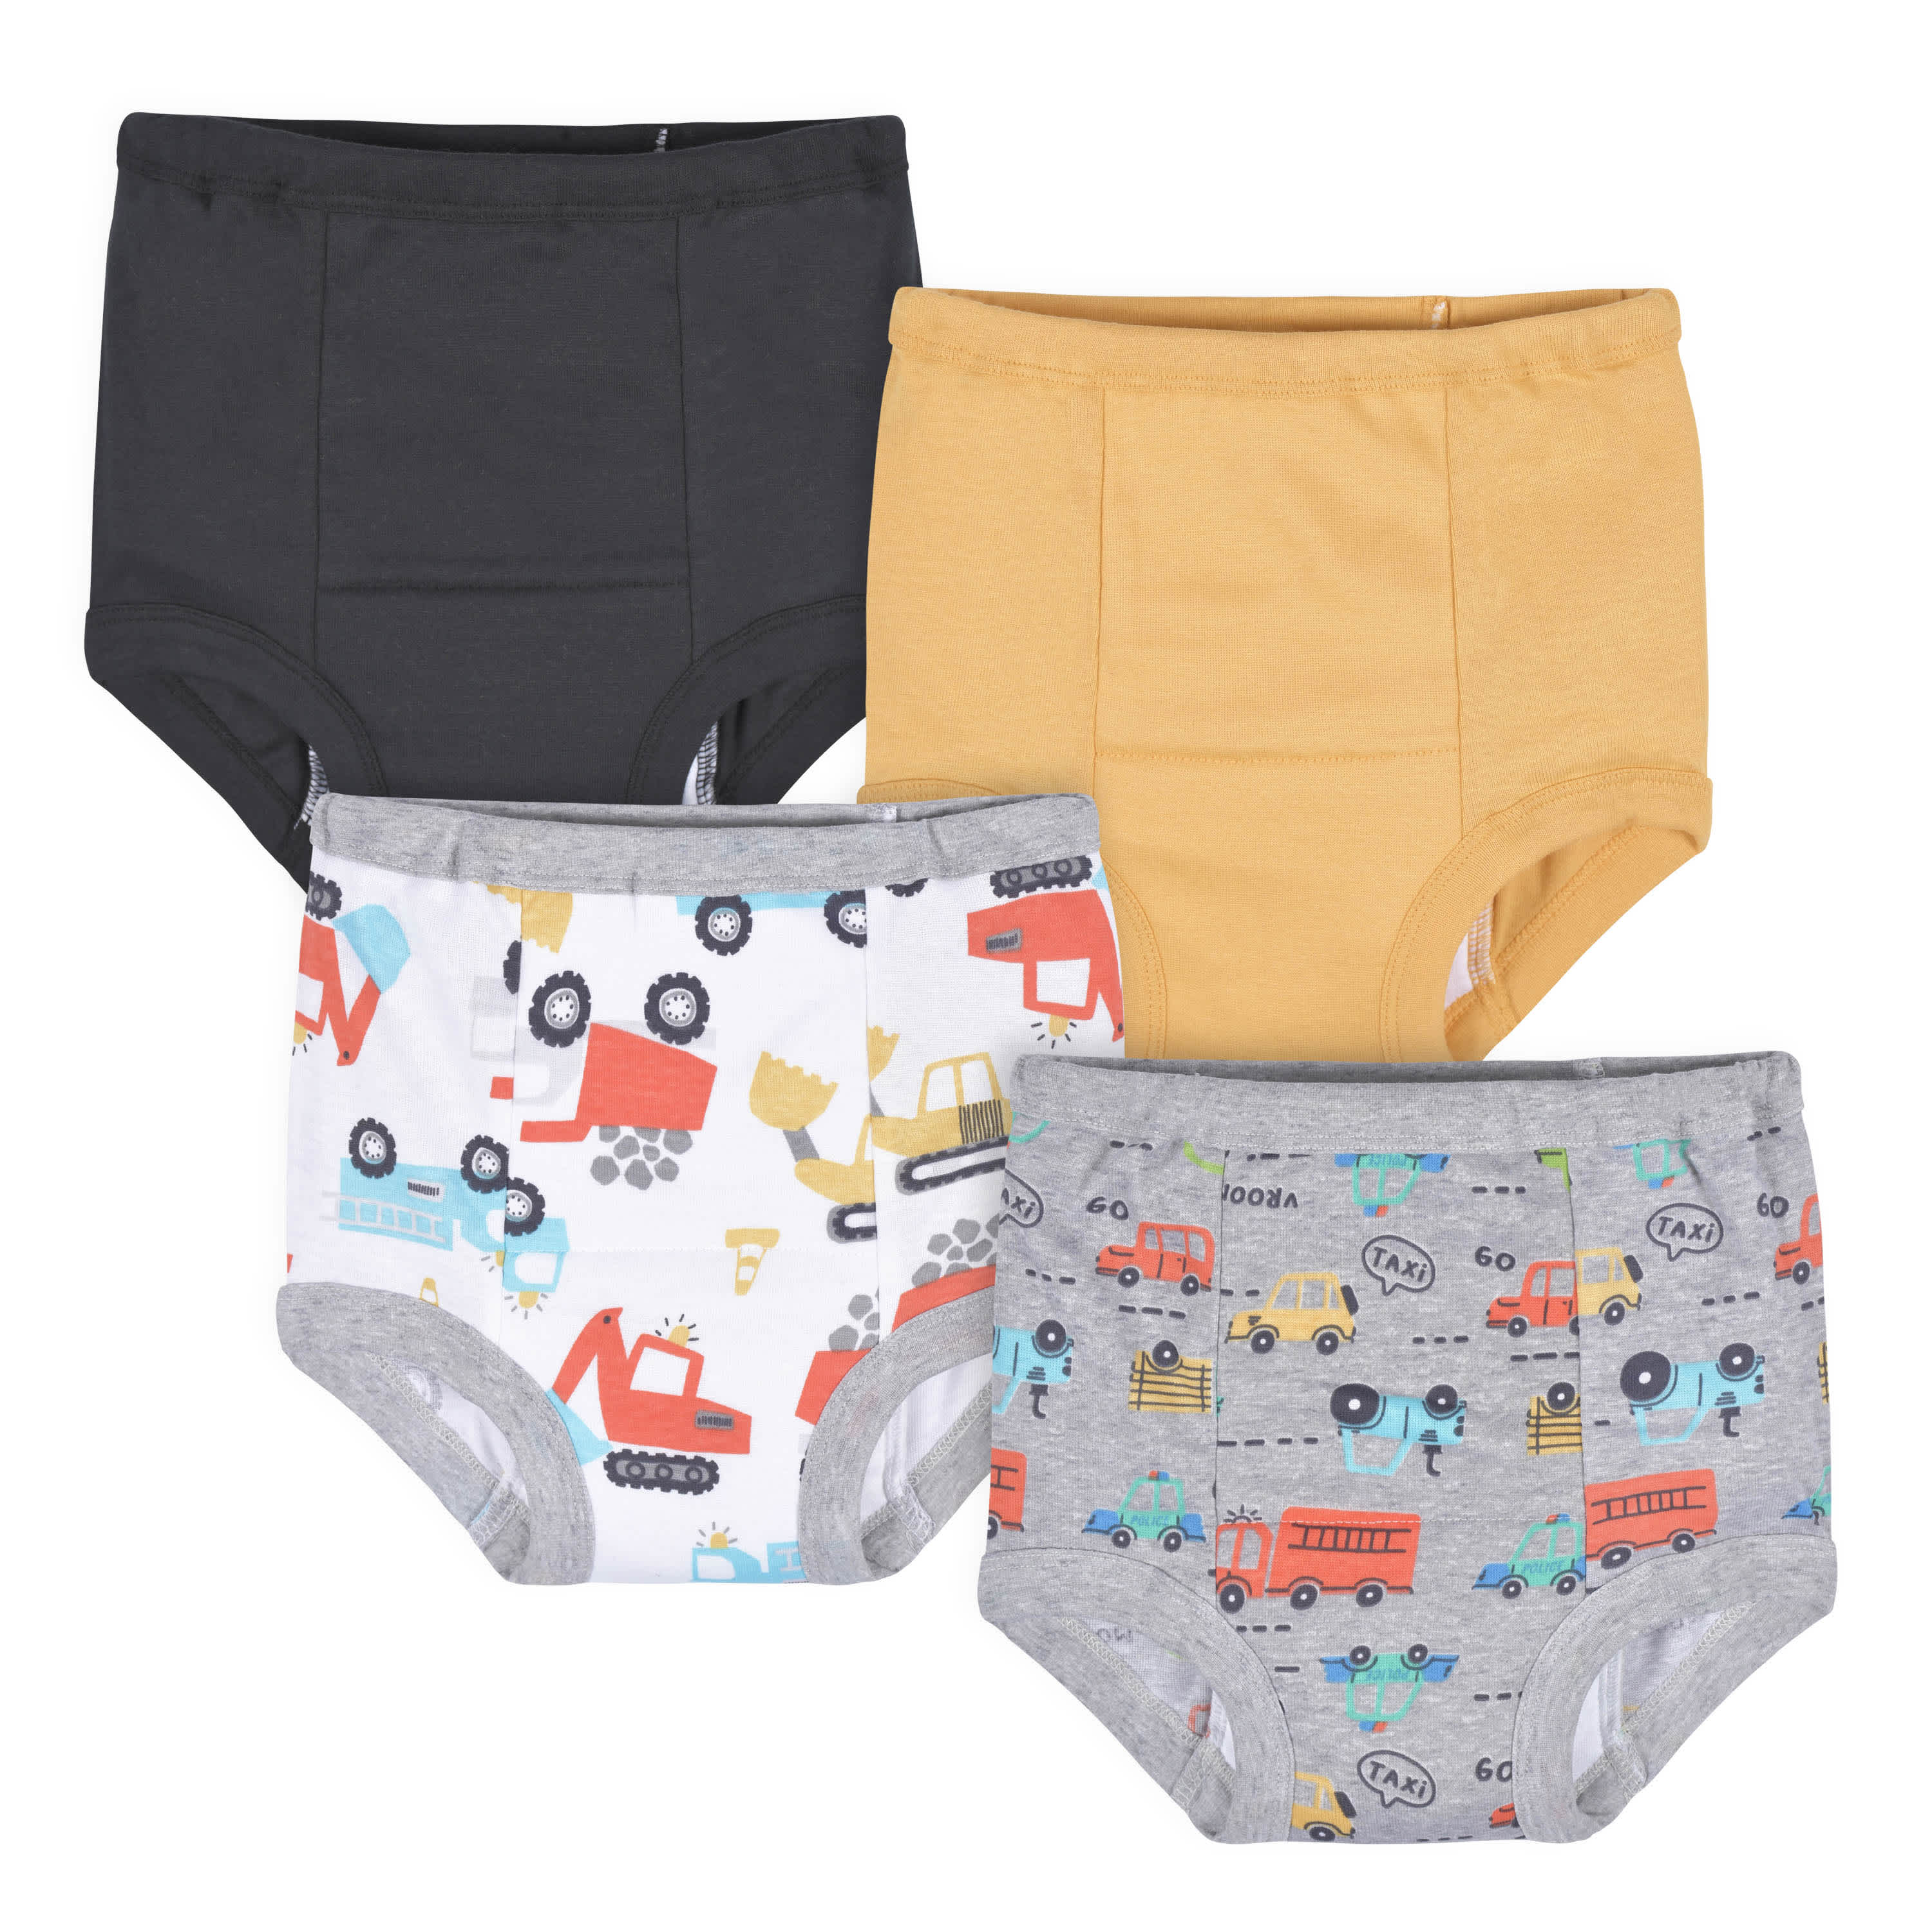 Gerber Baby Boys' Infant Toddler 4 Pack Potty Training Pants Underwear 2T  Explore 